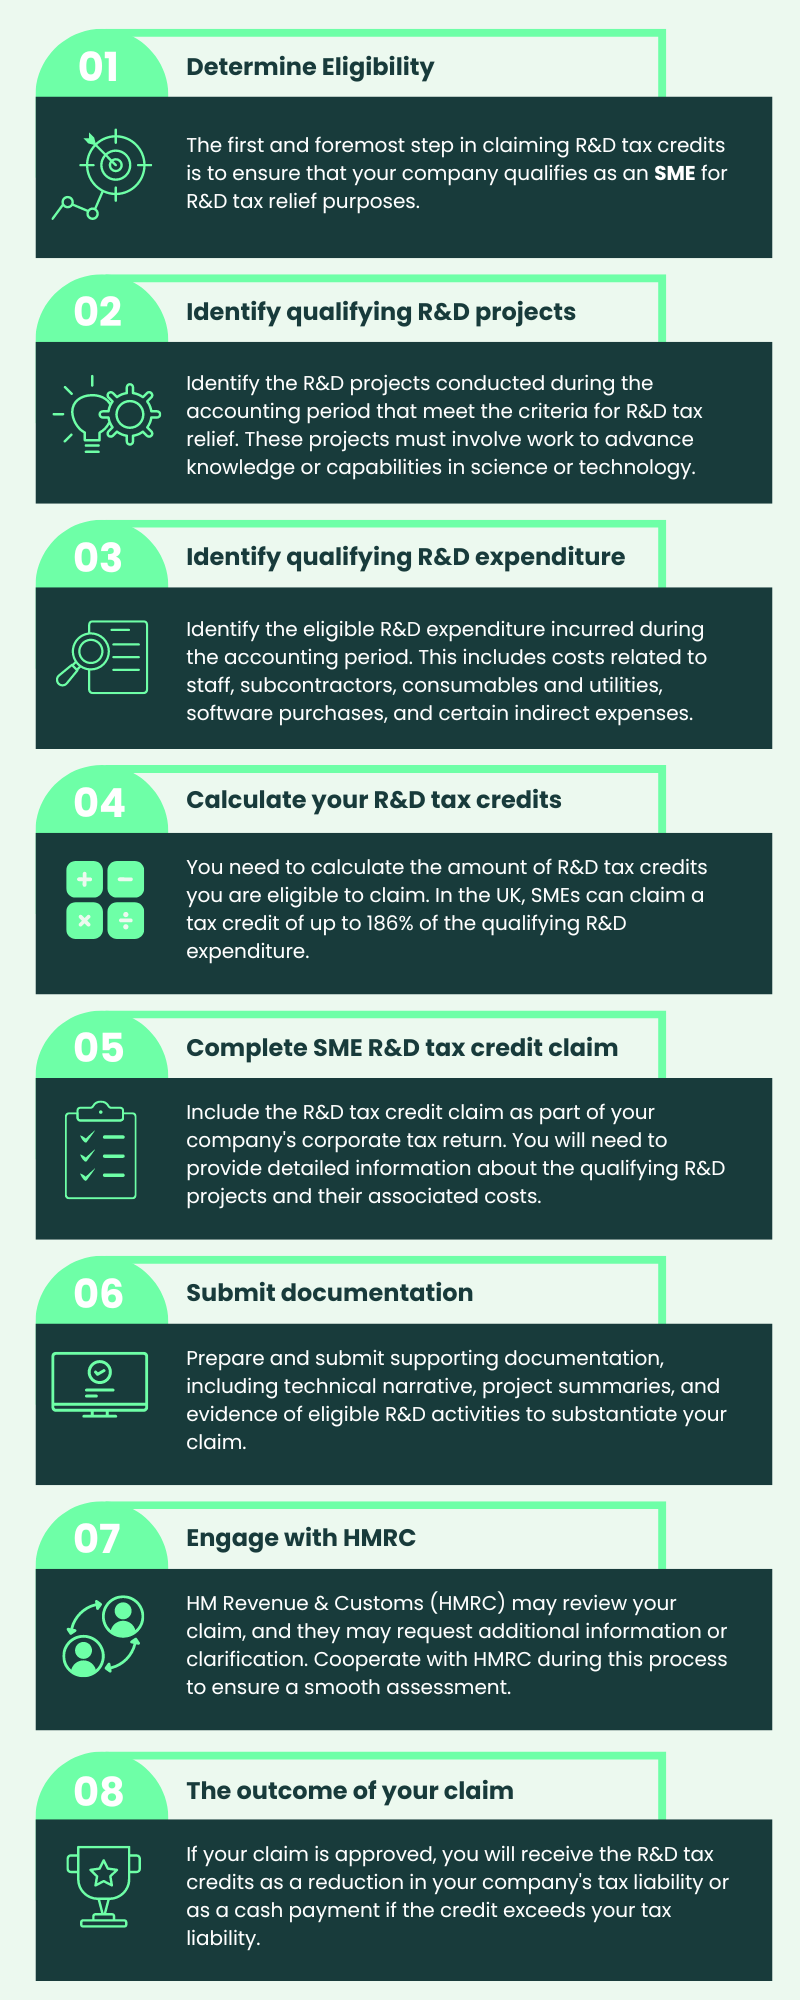 A process to claim R&D tax credits for SMEs